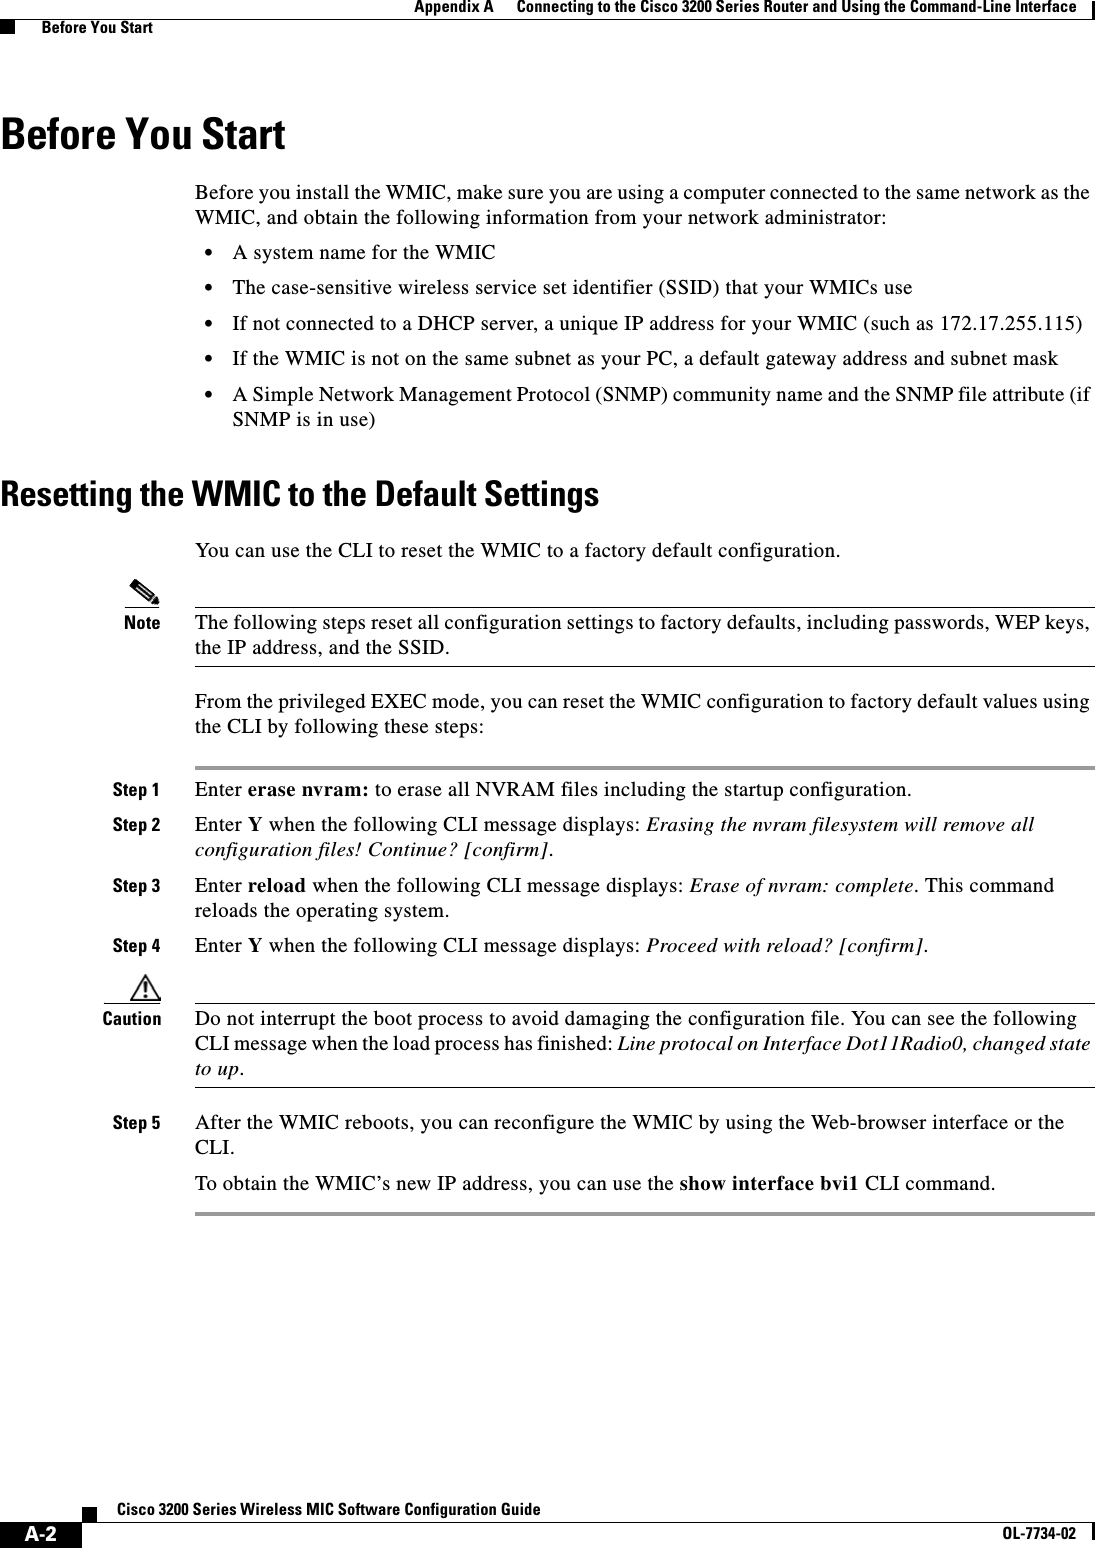 A-2Cisco 3200 Series Wireless MIC Software Configuration GuideOL-7734-02Appendix A      Connecting to the Cisco 3200 Series Router and Using the Command-Line Interface  Before You StartBefore You StartBefore you install the WMIC, make sure you are using a computer connected to the same network as the WMIC, and obtain the following information from your network administrator:•A system name for the WMIC•The case-sensitive wireless service set identifier (SSID) that your WMICs use•If not connected to a DHCP server, a unique IP address for your WMIC (such as 172.17.255.115)•If the WMIC is not on the same subnet as your PC, a default gateway address and subnet mask•A Simple Network Management Protocol (SNMP) community name and the SNMP file attribute (if SNMP is in use)Resetting the WMIC to the Default SettingsYou can use the CLI to reset the WMIC to a factory default configuration.Note The following steps reset all configuration settings to factory defaults, including passwords, WEP keys, the IP address, and the SSID. From the privileged EXEC mode, you can reset the WMIC configuration to factory default values using the CLI by following these steps: Step 1 Enter erase nvram: to erase all NVRAM files including the startup configuration.Step 2 Enter Y when the following CLI message displays: Erasing the nvram filesystem will remove all configuration files! Continue? [confirm].Step 3 Enter reload when the following CLI message displays: Erase of nvram: complete. This command reloads the operating system.Step 4 Enter Y when the following CLI message displays: Proceed with reload? [confirm].Caution Do not interrupt the boot process to avoid damaging the configuration file. You can see the following CLI message when the load process has finished: Line protocal on Interface Dot11Radio0, changed state to up.Step 5 After the WMIC reboots, you can reconfigure the WMIC by using the Web-browser interface or the CLI.To obtain the WMIC’s new IP address, you can use the show interface bvi1 CLI command.